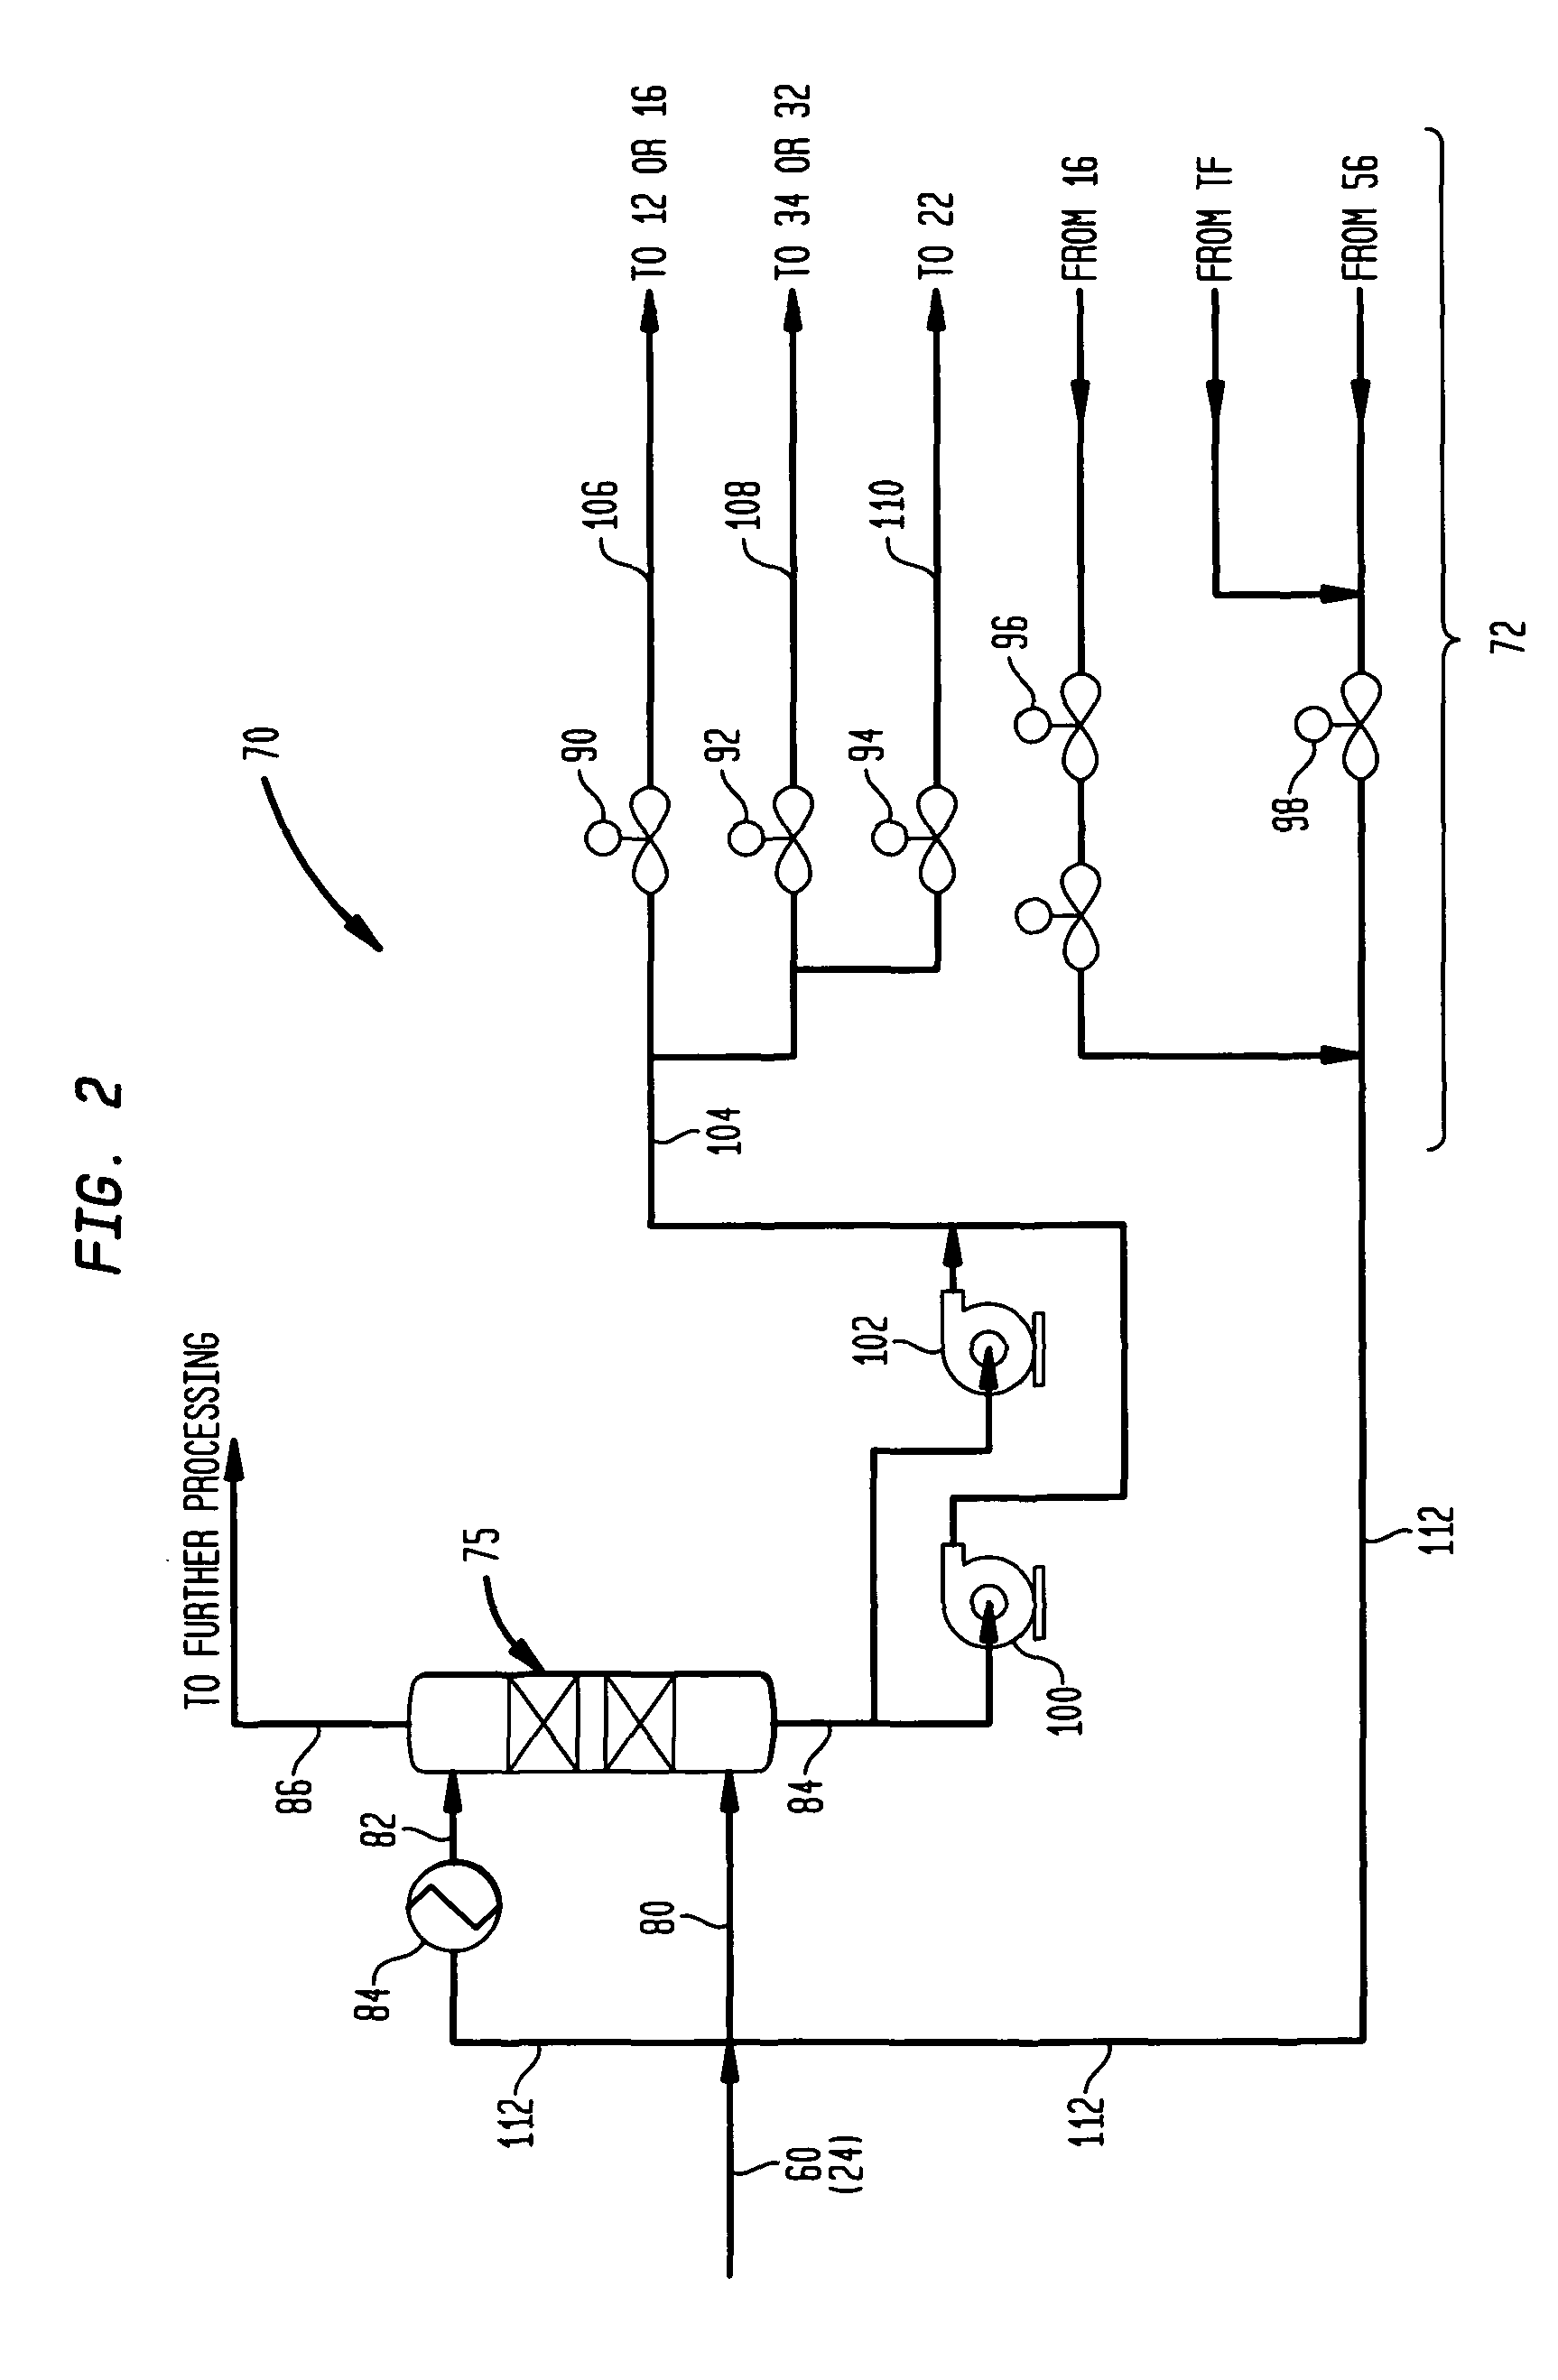 Methanol carbonylation system having absorber with multiple solvent options